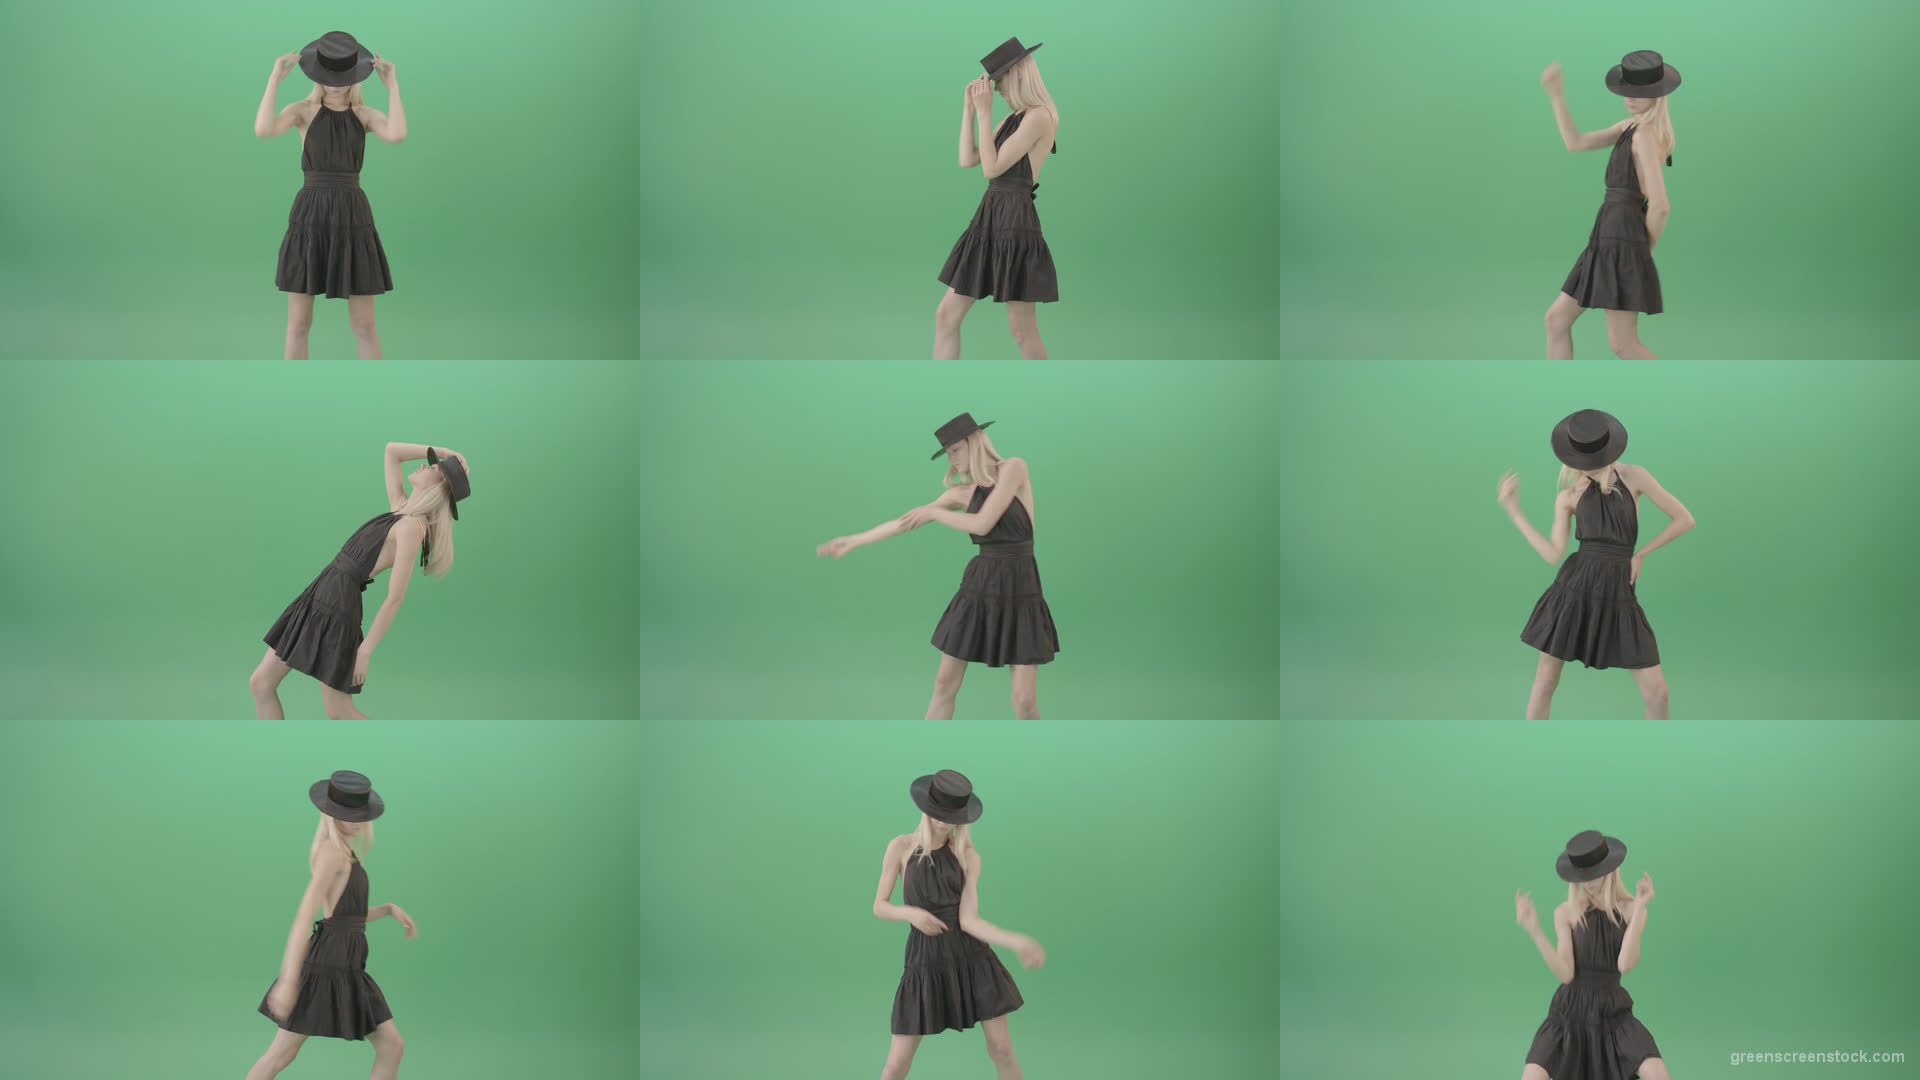 Video-Art-Fashion-Dance-by-Girl-in-black-outlet-and-dark-hat-on-green-screen-Video-Footage-1920 Green Screen Stock